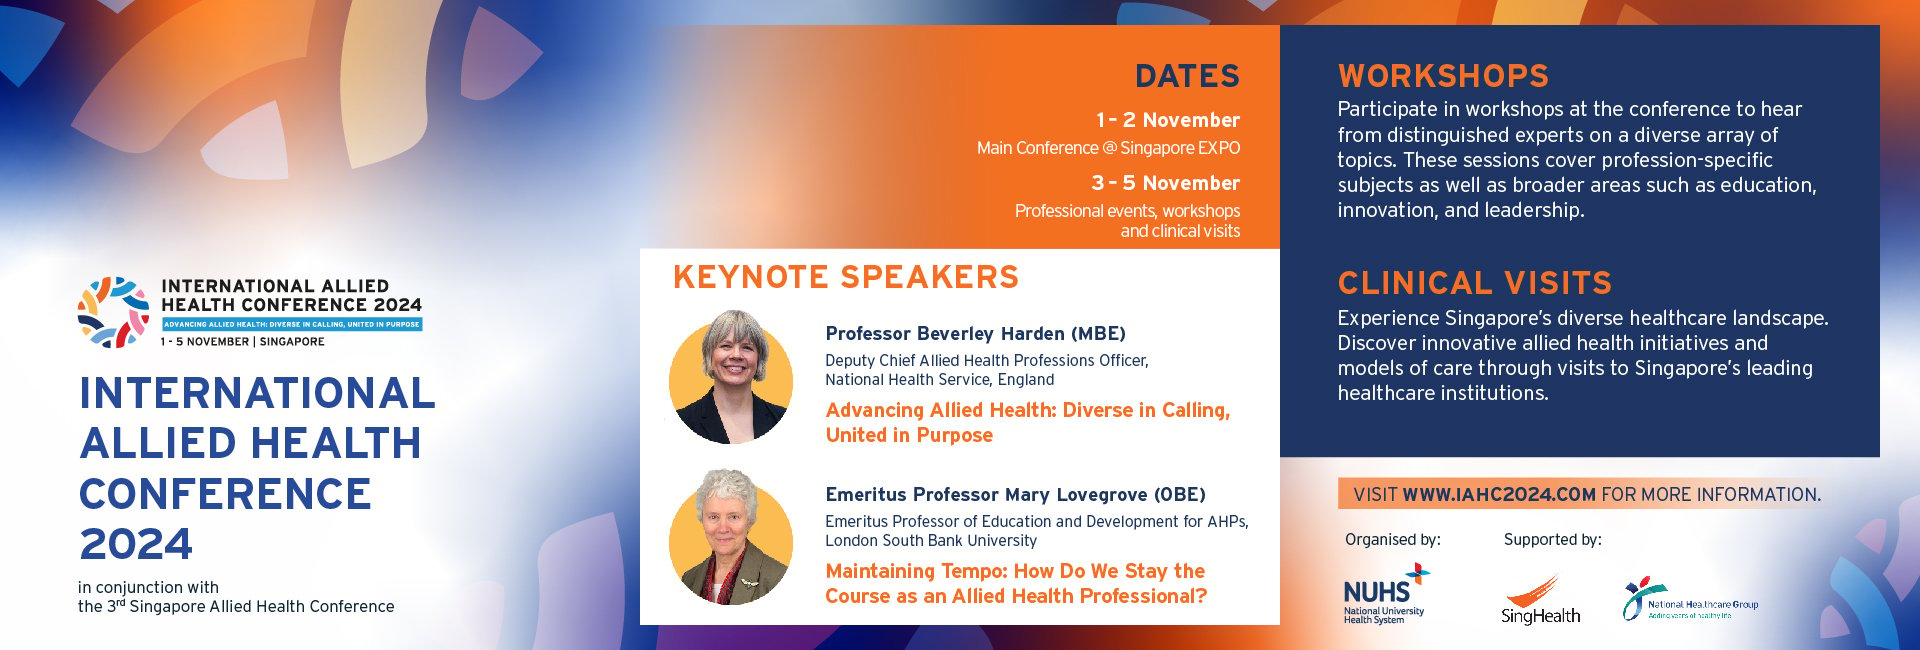 International Allied Health Conference (IAHC) 2024